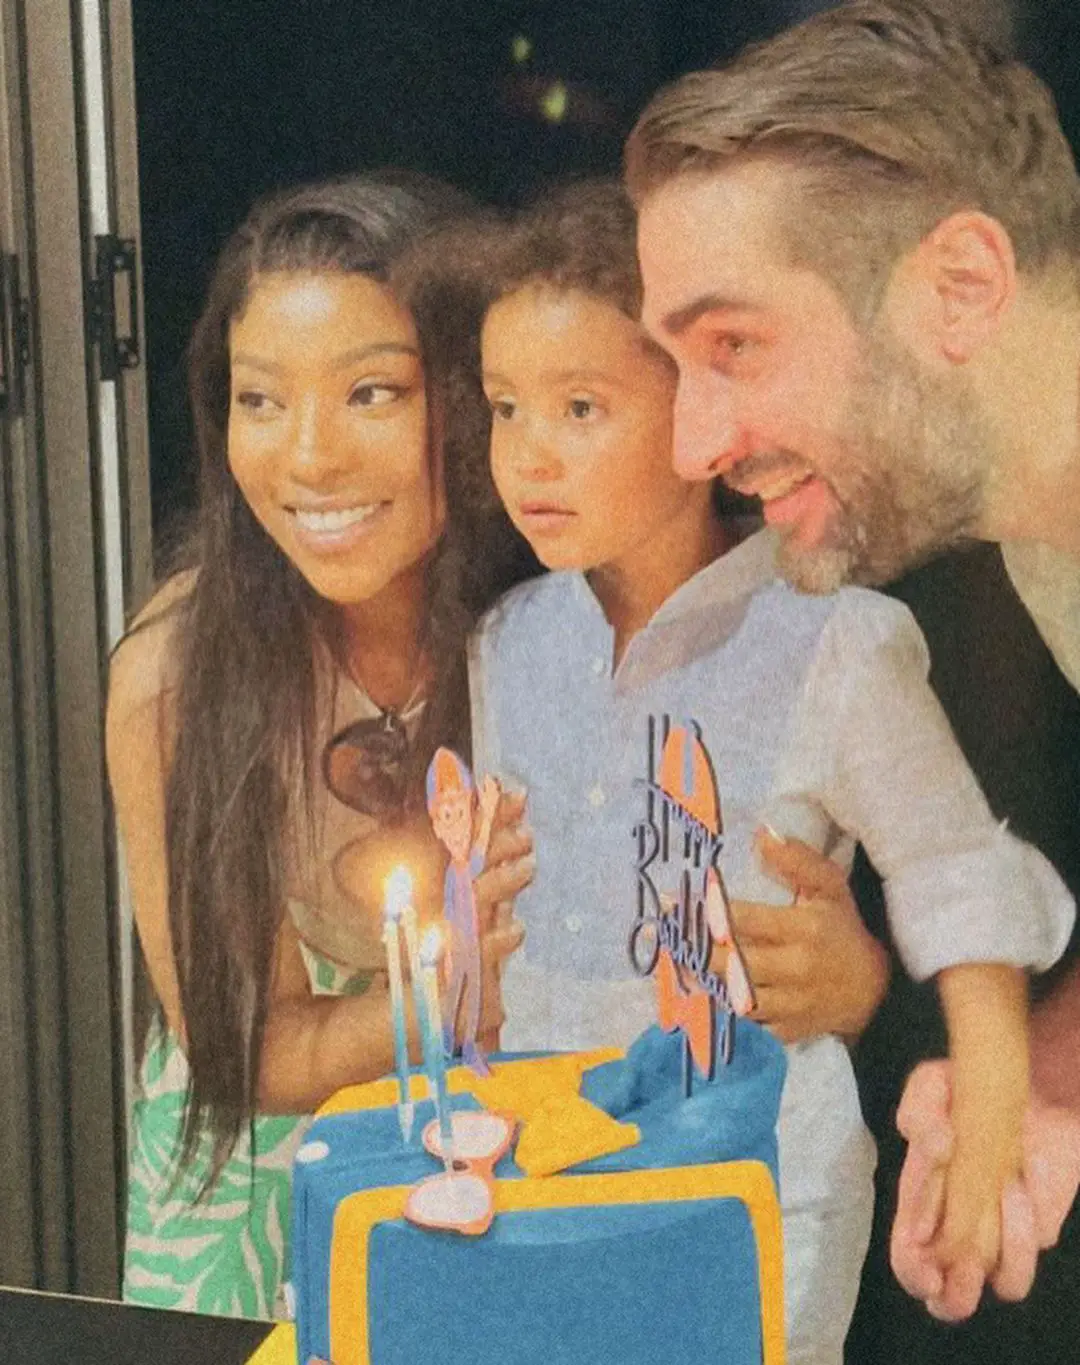 Pearl Modiadie celebrate her son’s 3rd birthday in style